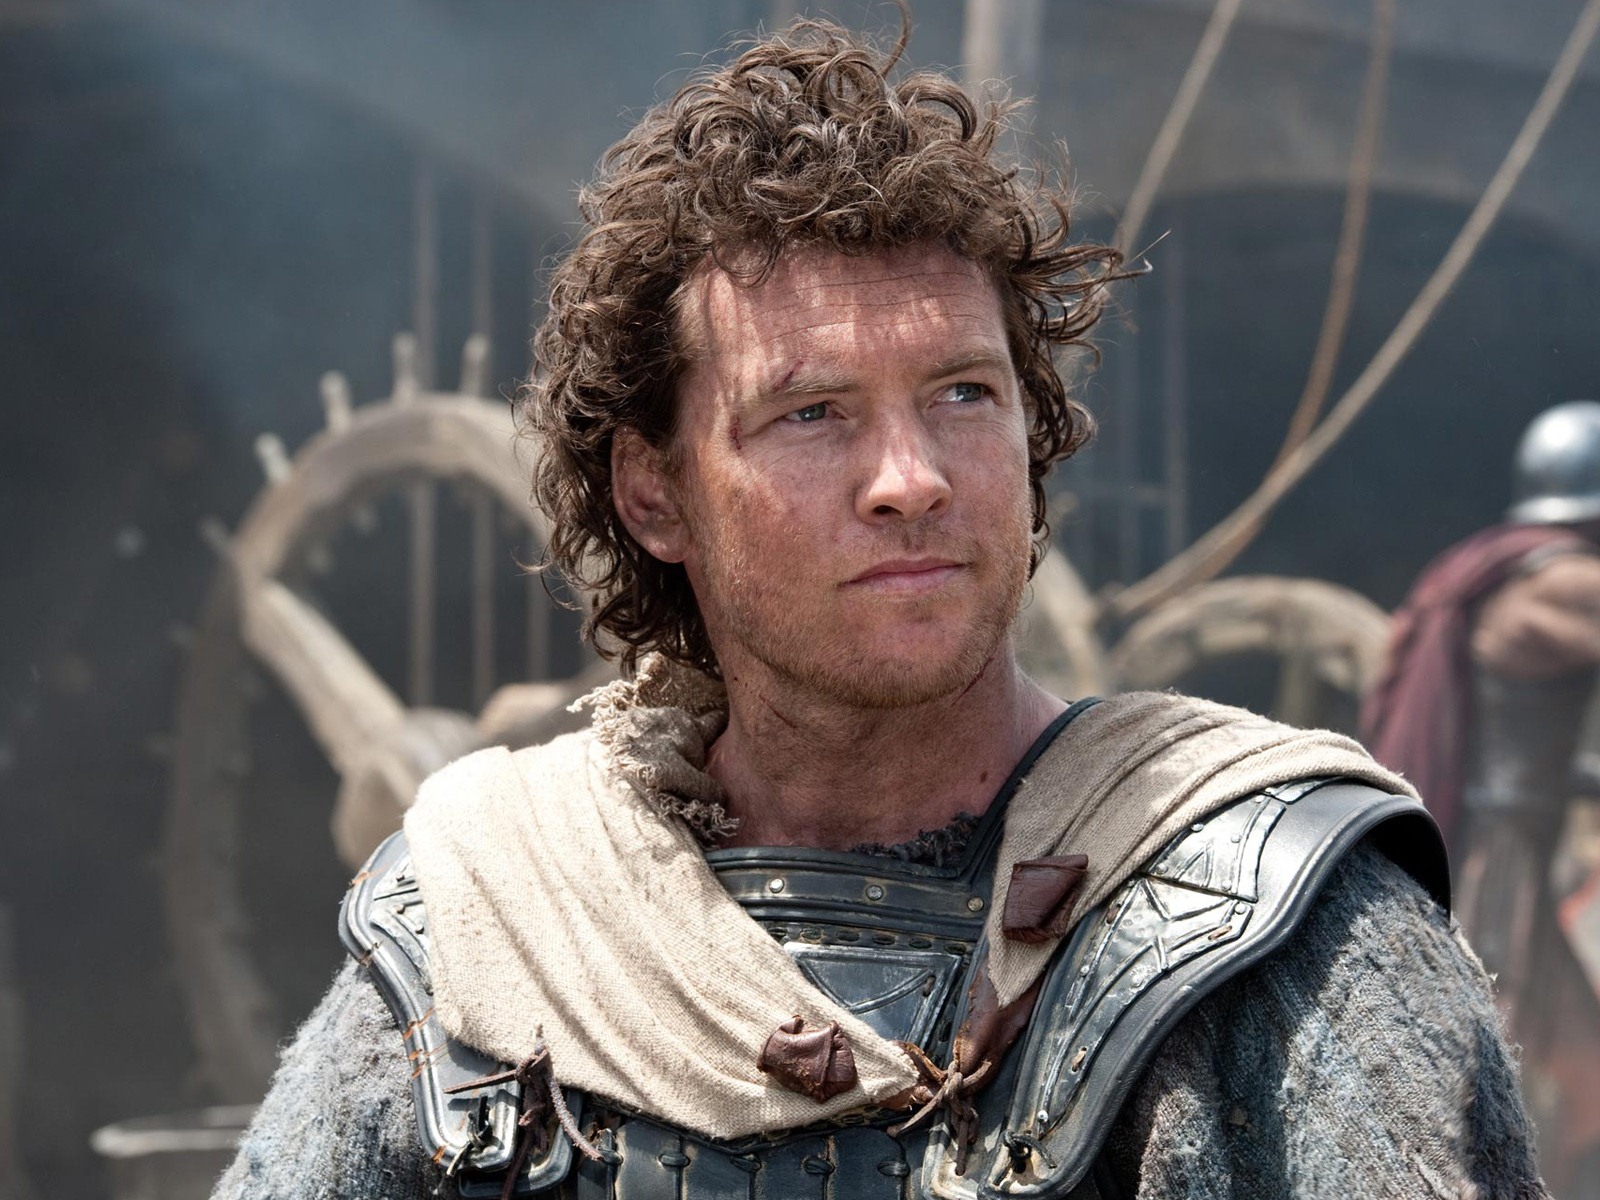 Wrath of the Titans HD Wallpapers #5 - 1600x1200